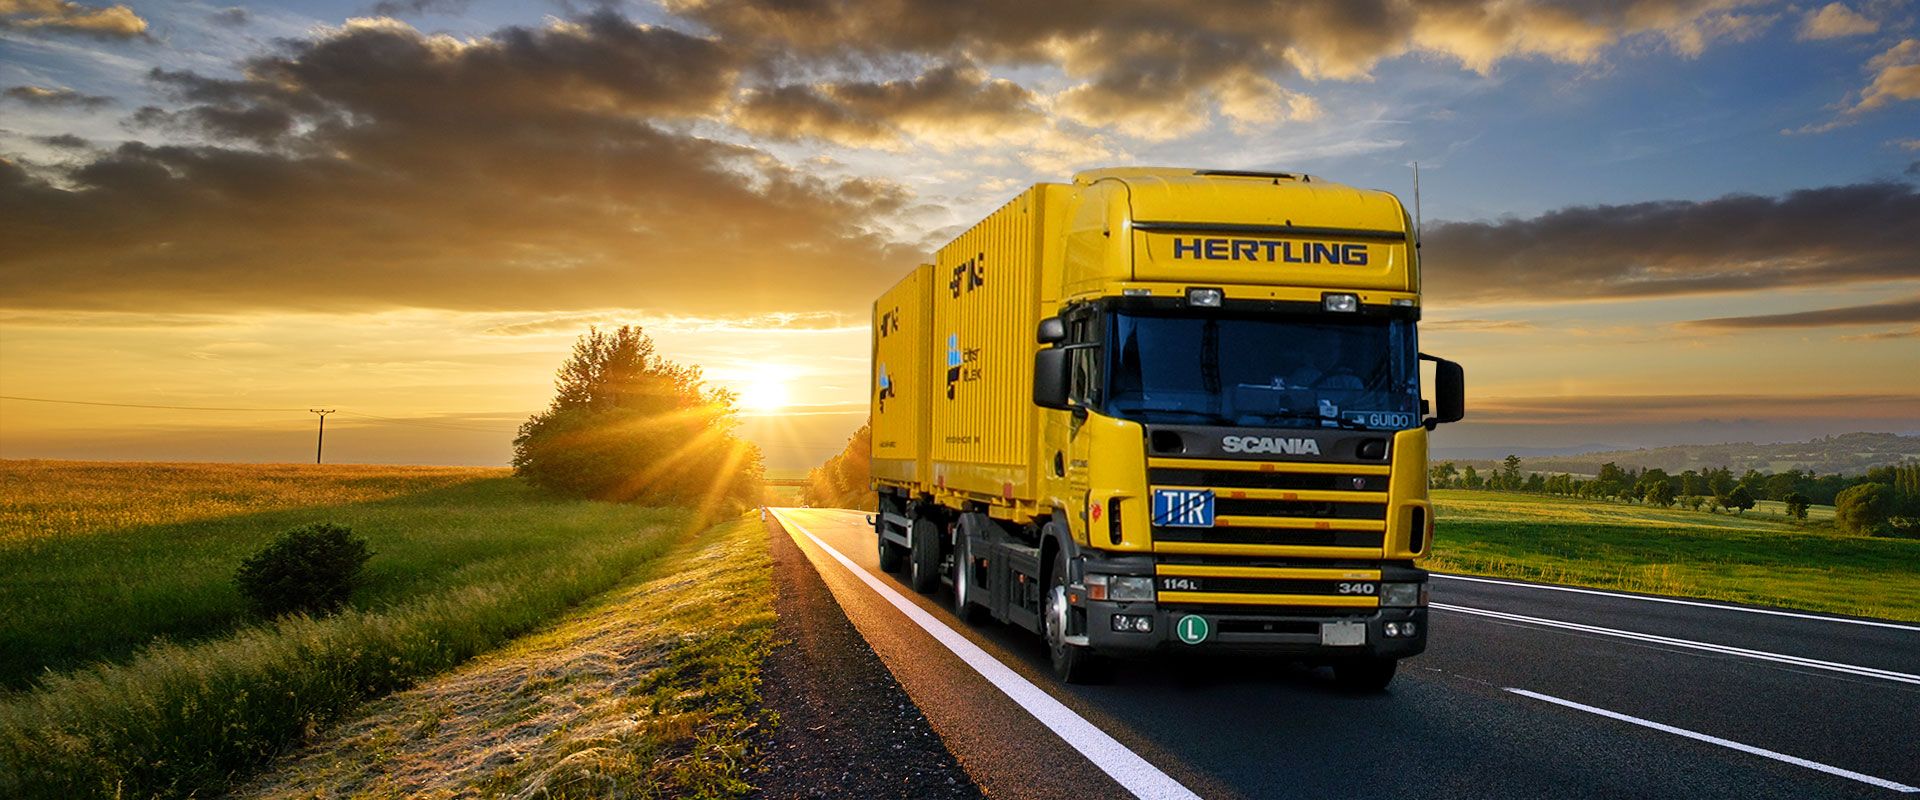 HERTLING moving truck on the road